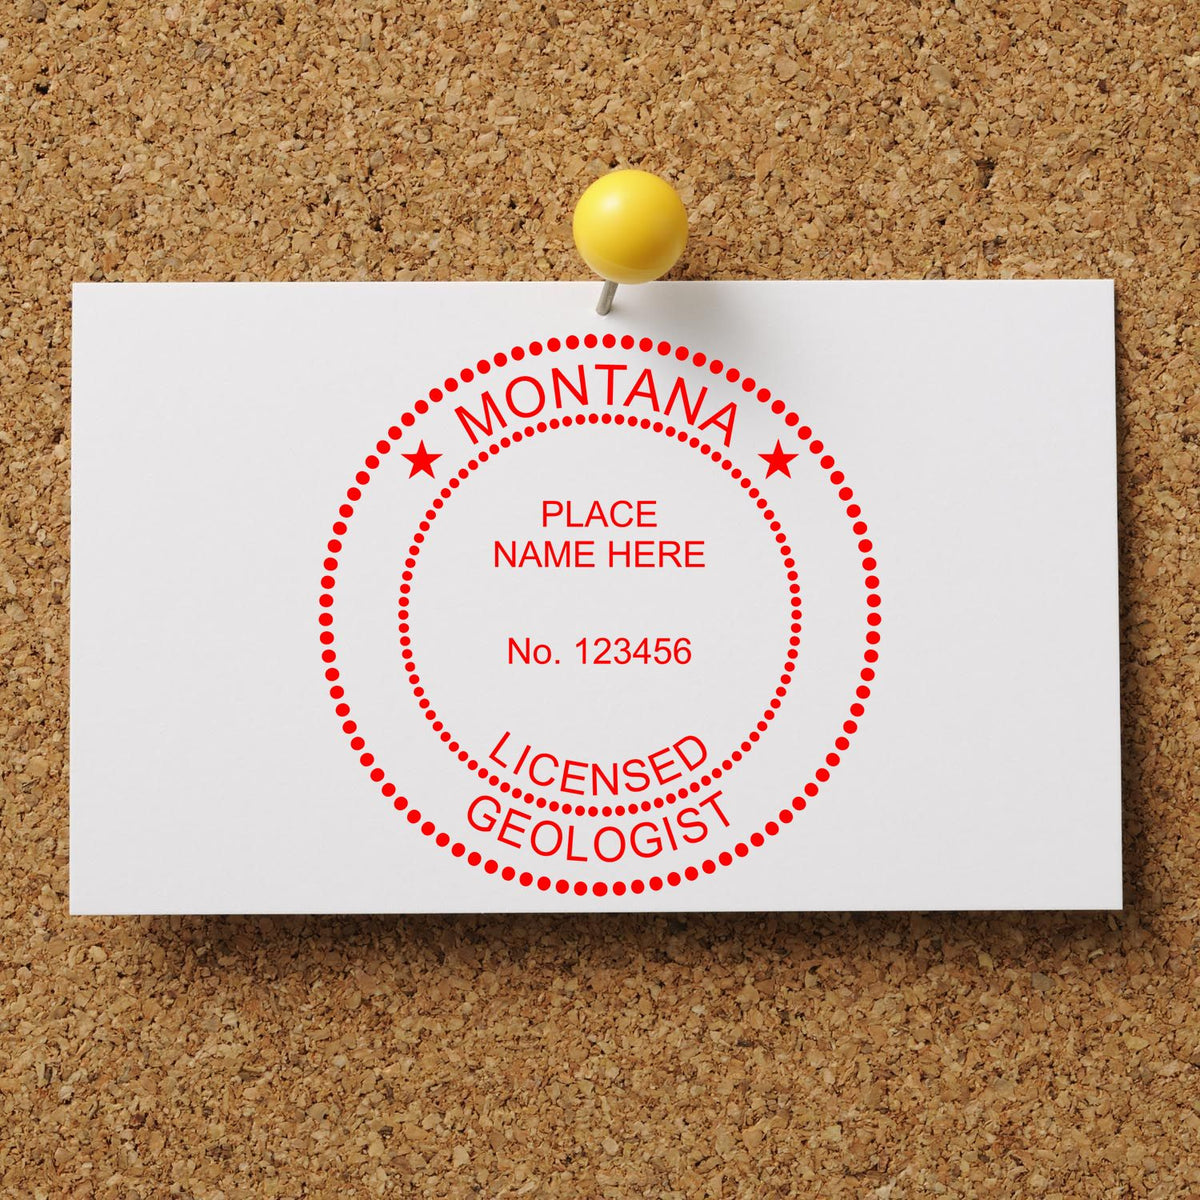 A stamped imprint of the Slim Pre-Inked Montana Professional Geologist Seal Stamp in this stylish lifestyle photo, setting the tone for a unique and personalized product.